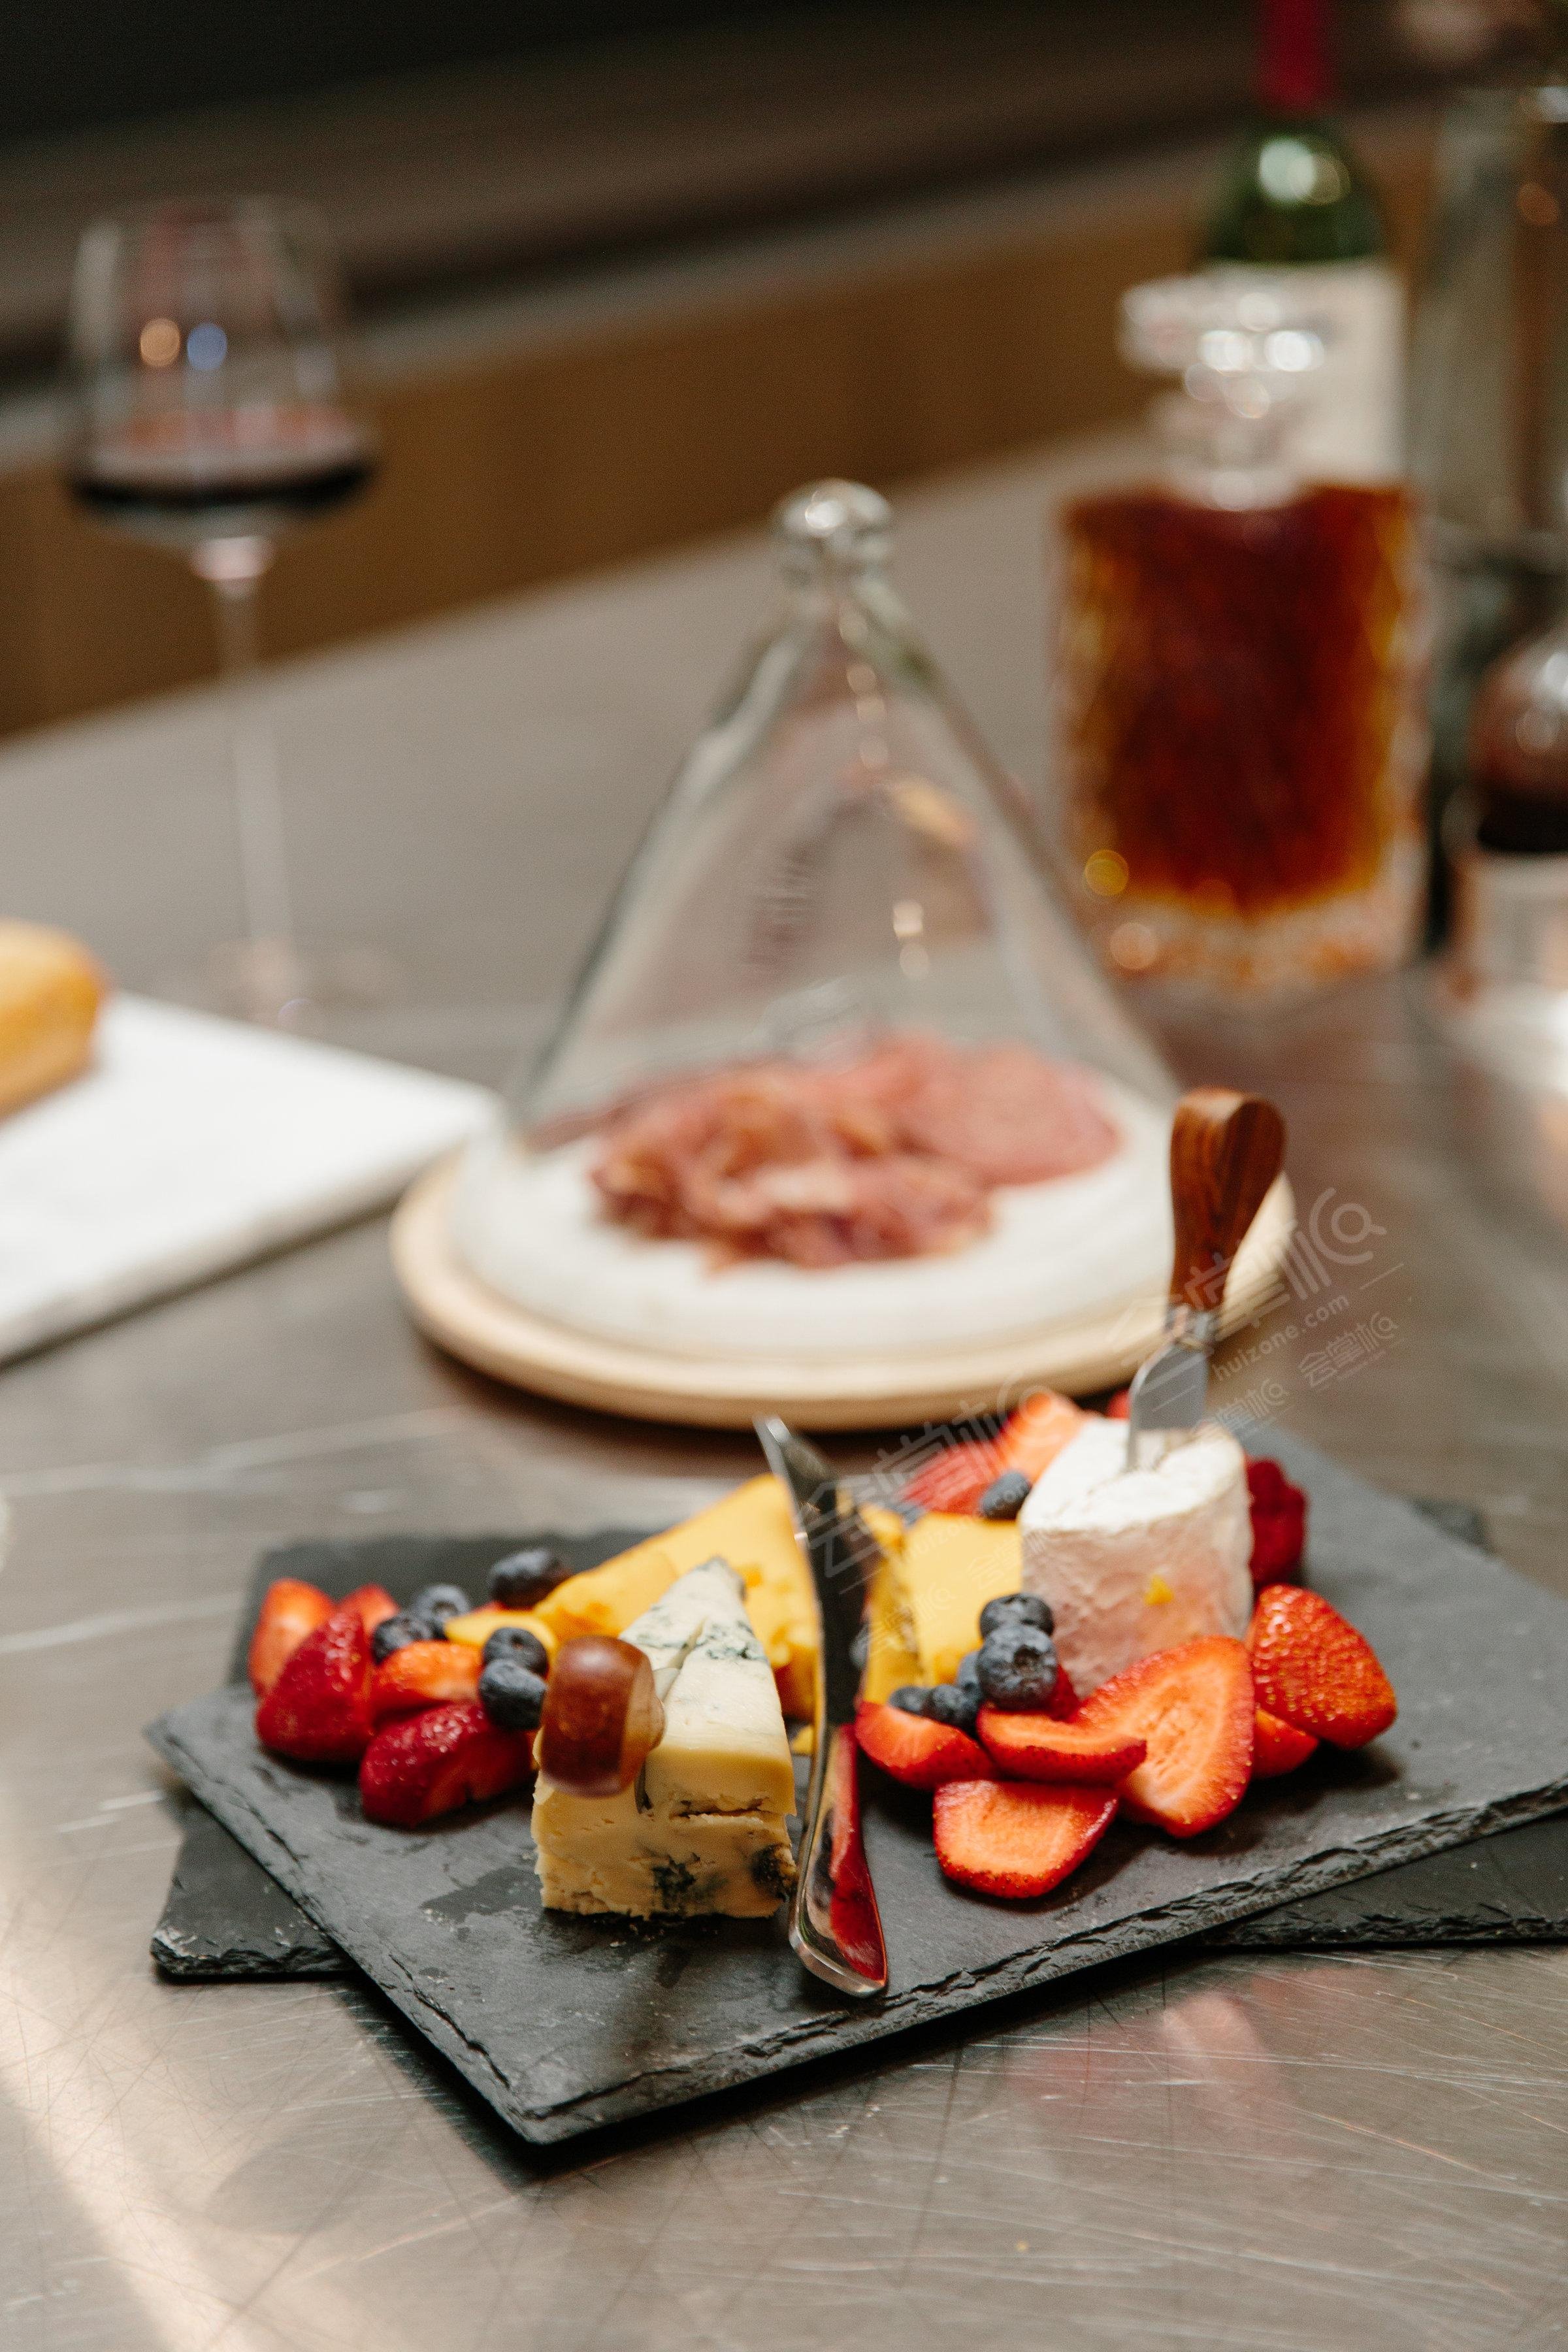 Mini Moments - A Chic, Intimate Space Designed to Inspire: Tastings l Demos l Pop-ups